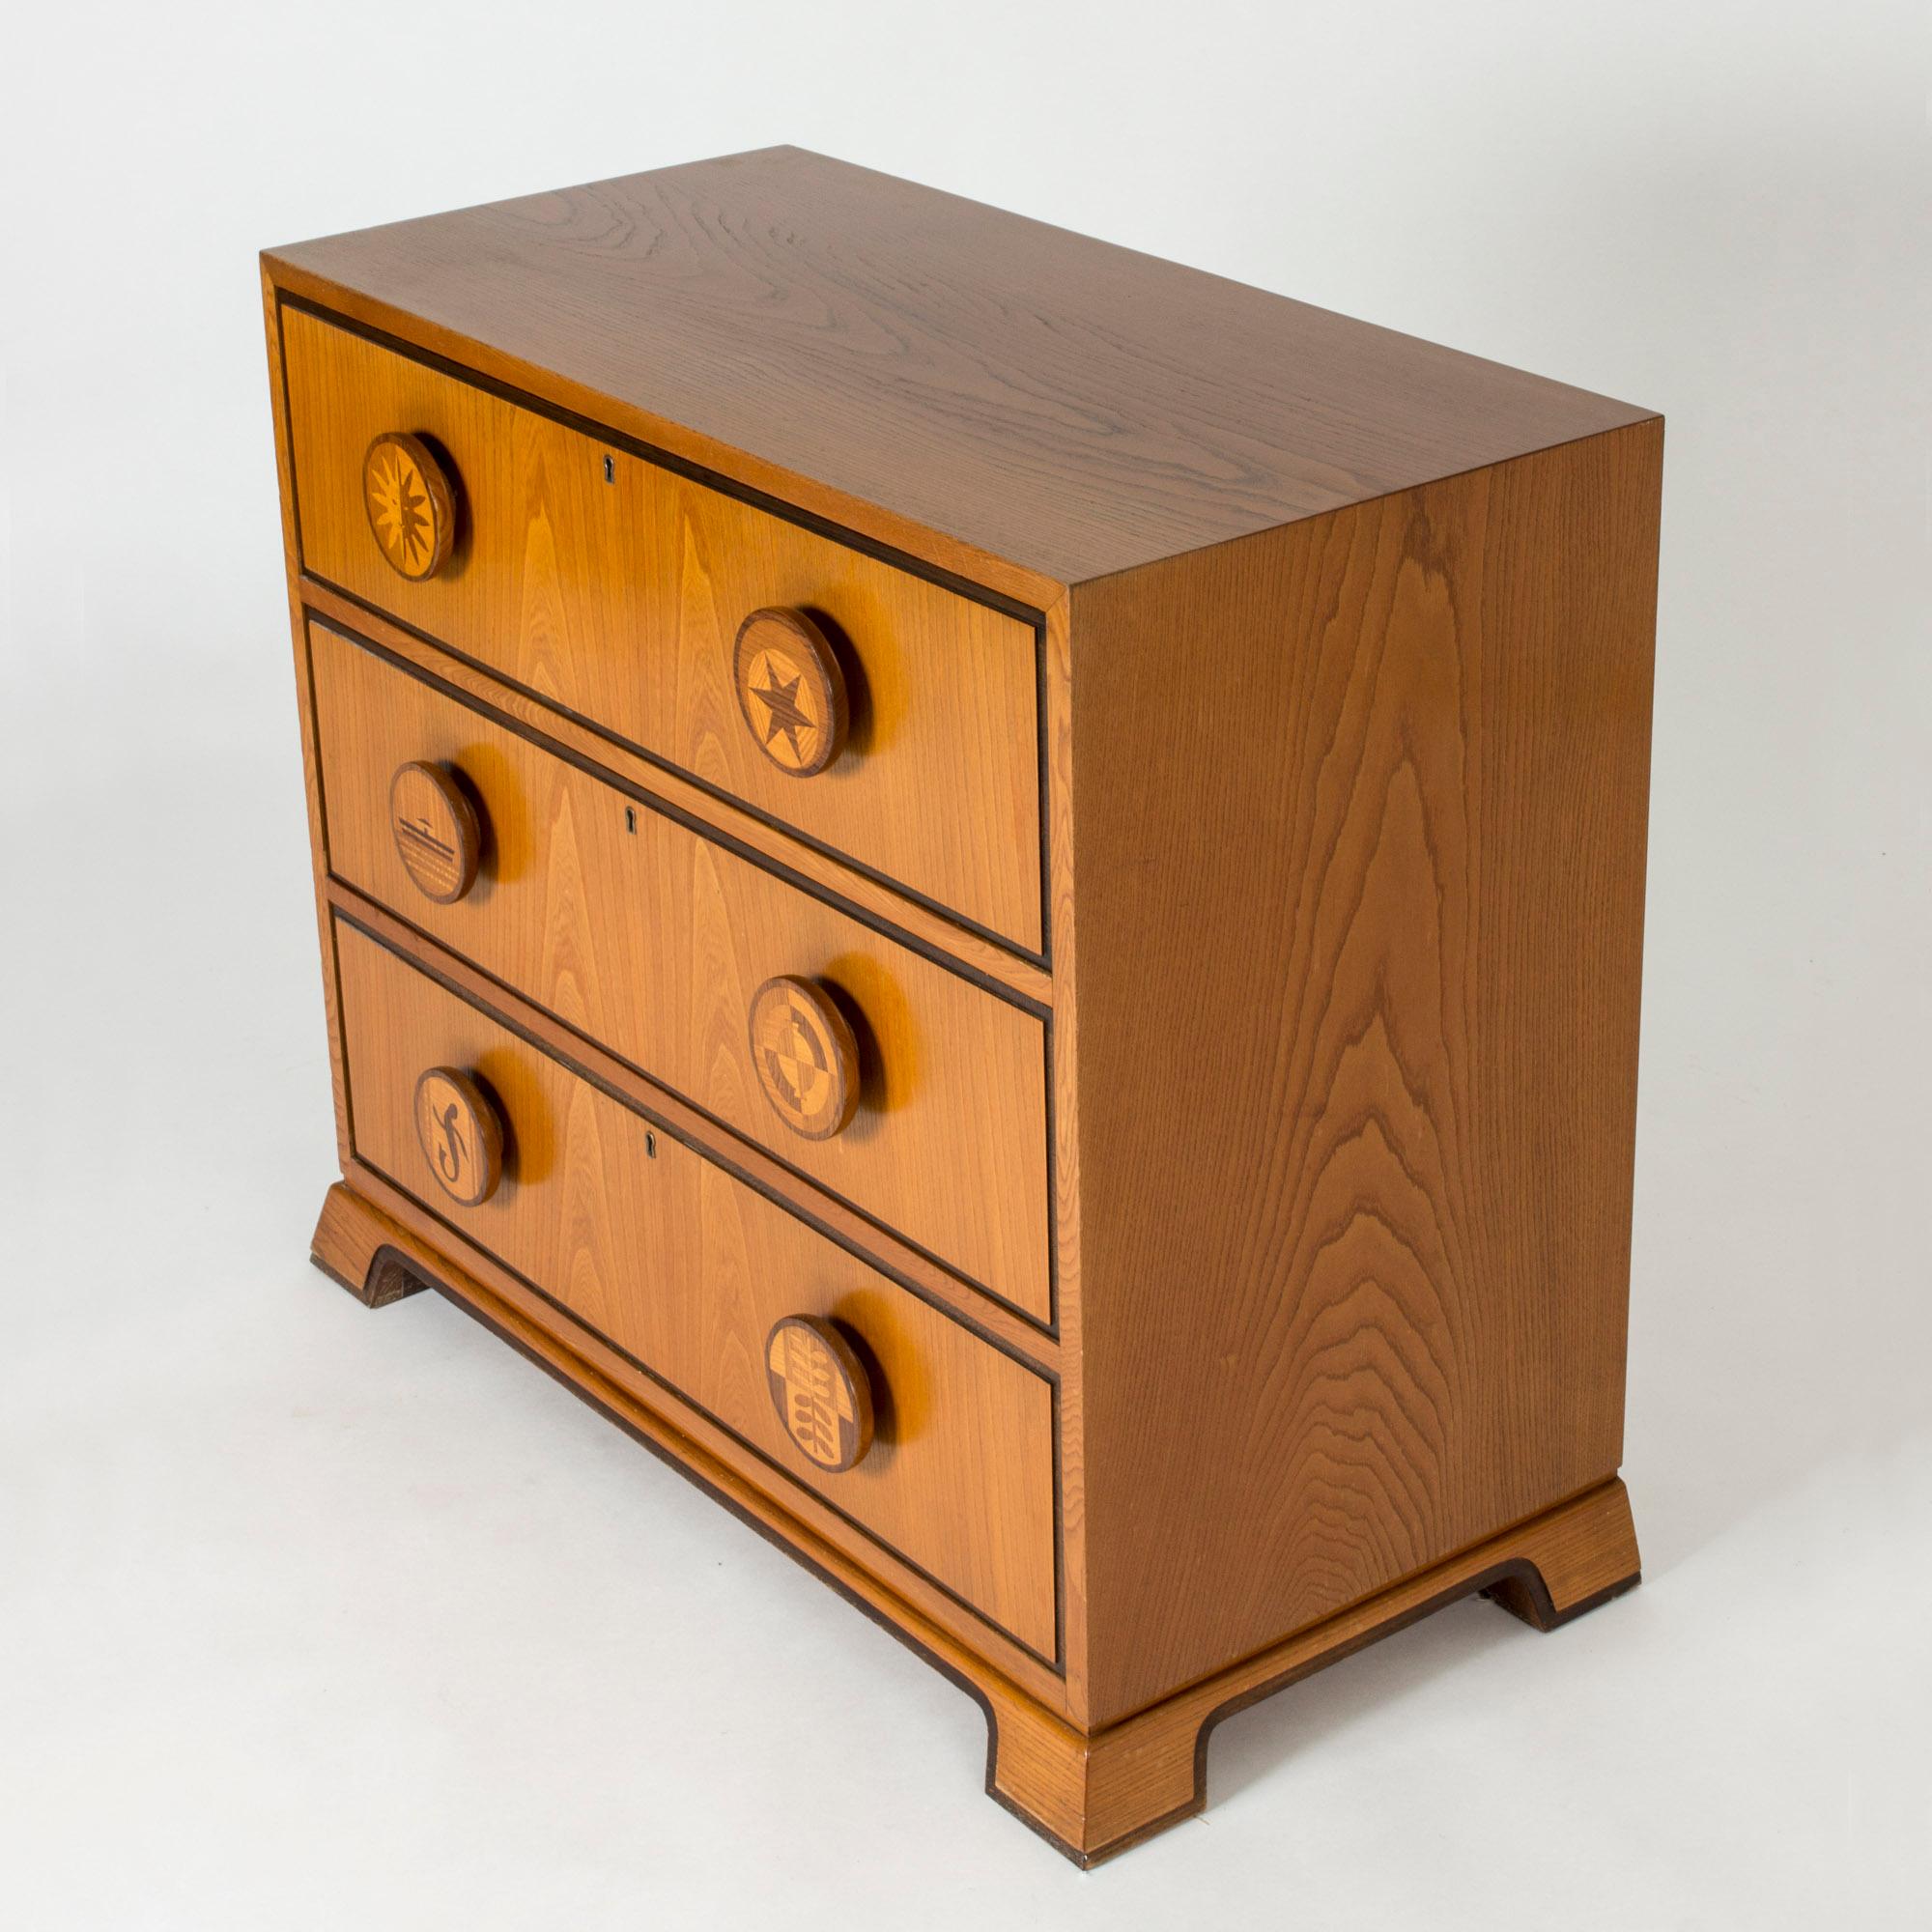 Scandinavian Modern 1940s Swedish Modern Chest of Drawers by Otto Schulz for Boet, Sweden